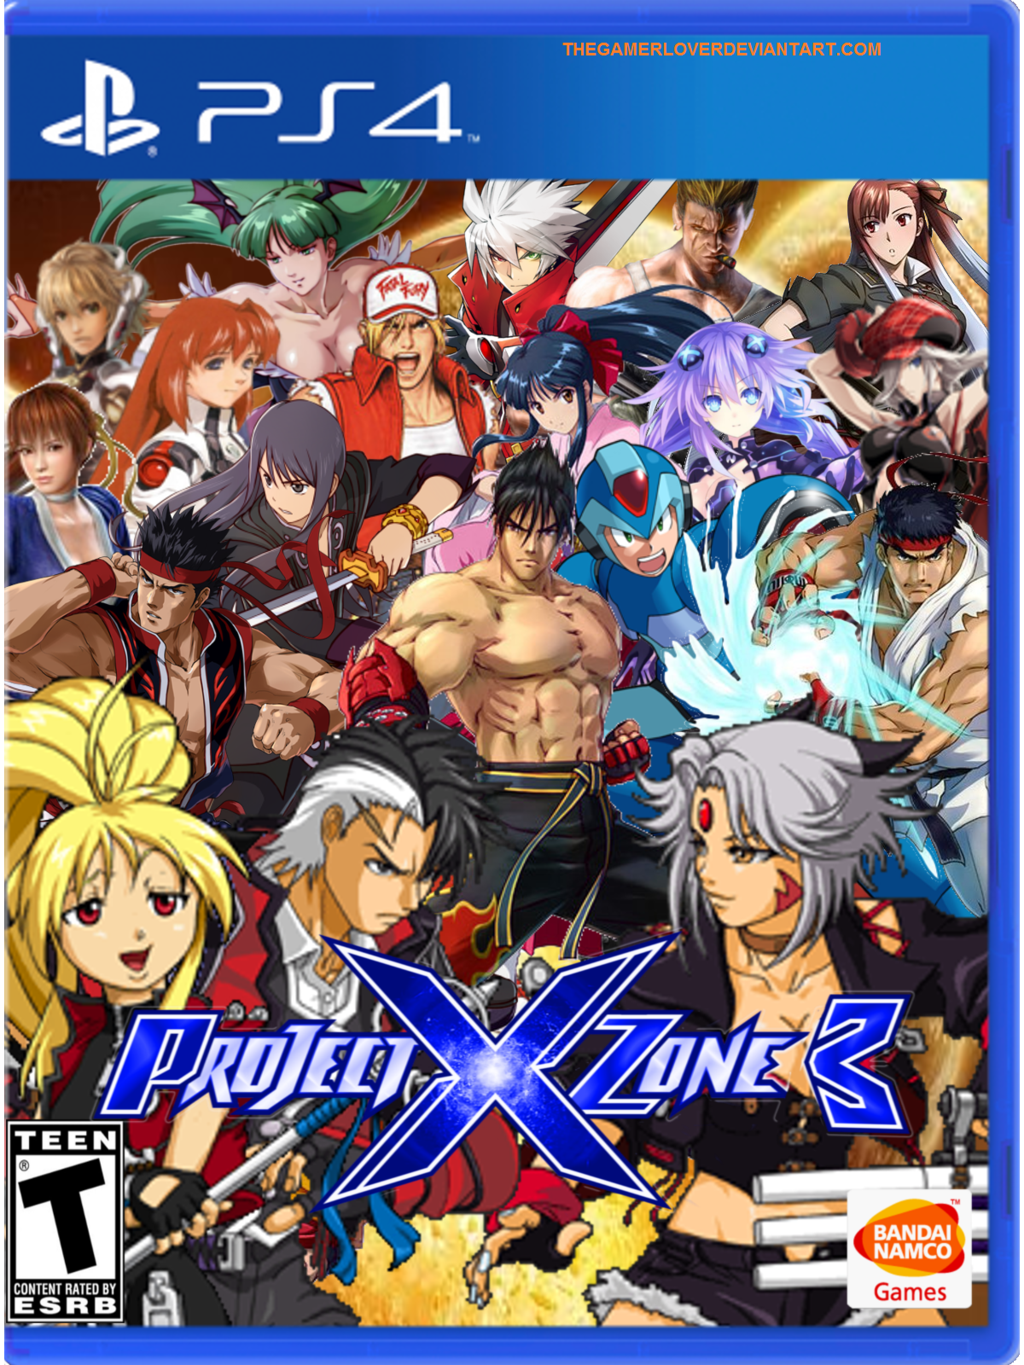 project x zone 3 nintendo switch download